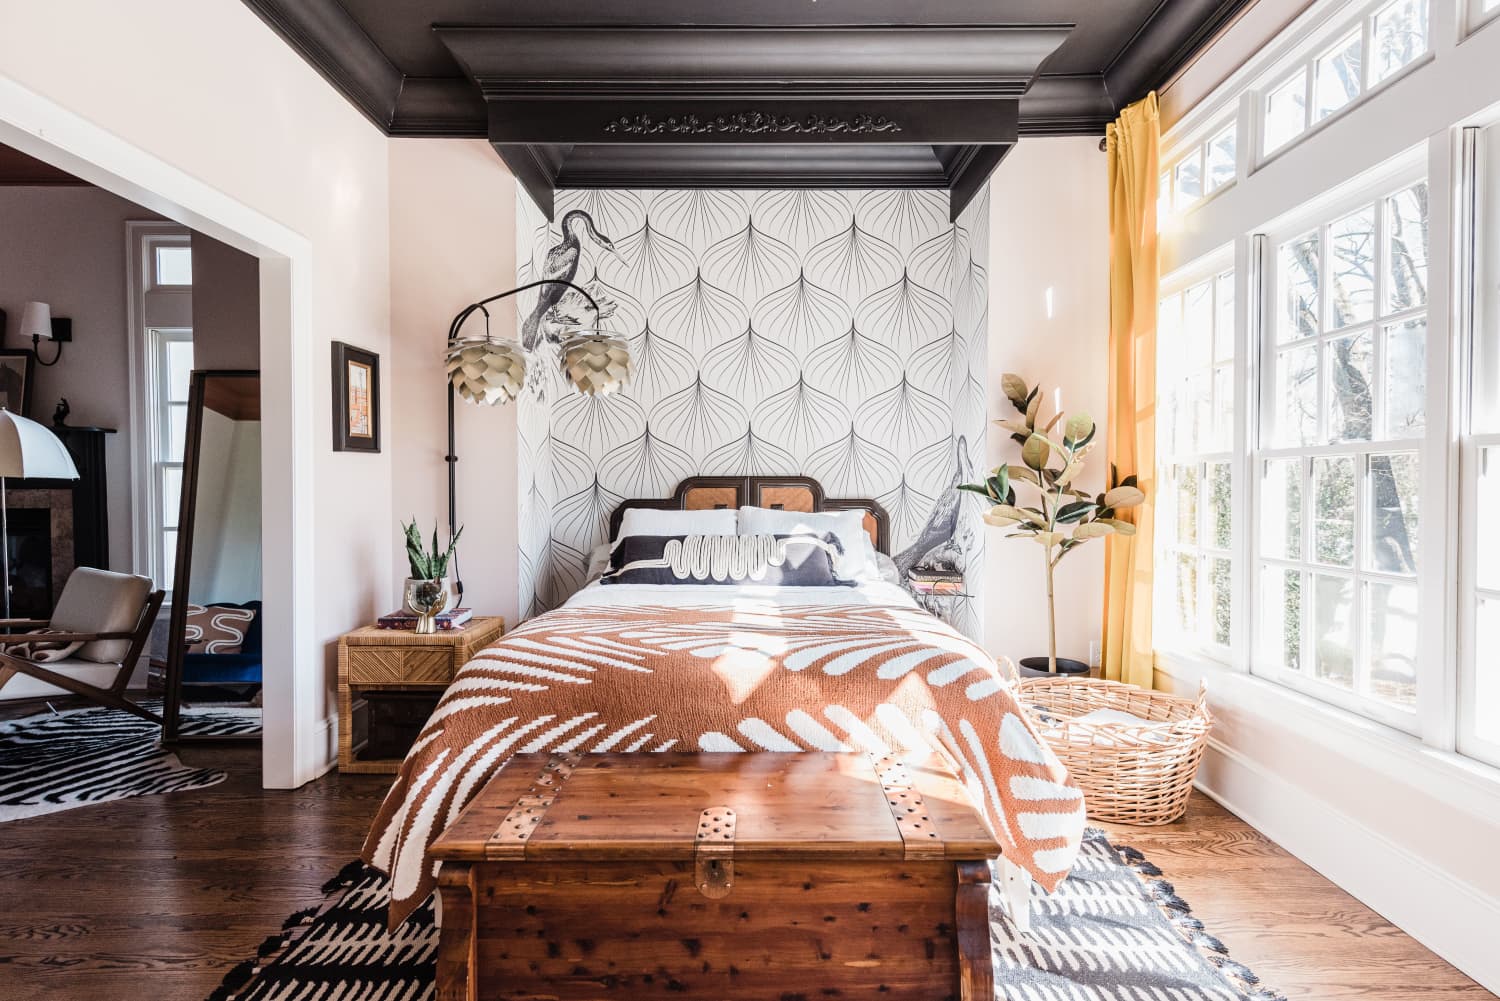 Designers Say These 7 Headboard Styles Can Make Your Bedroom Look Expensive — and They’re Small-Space Friendly, Too